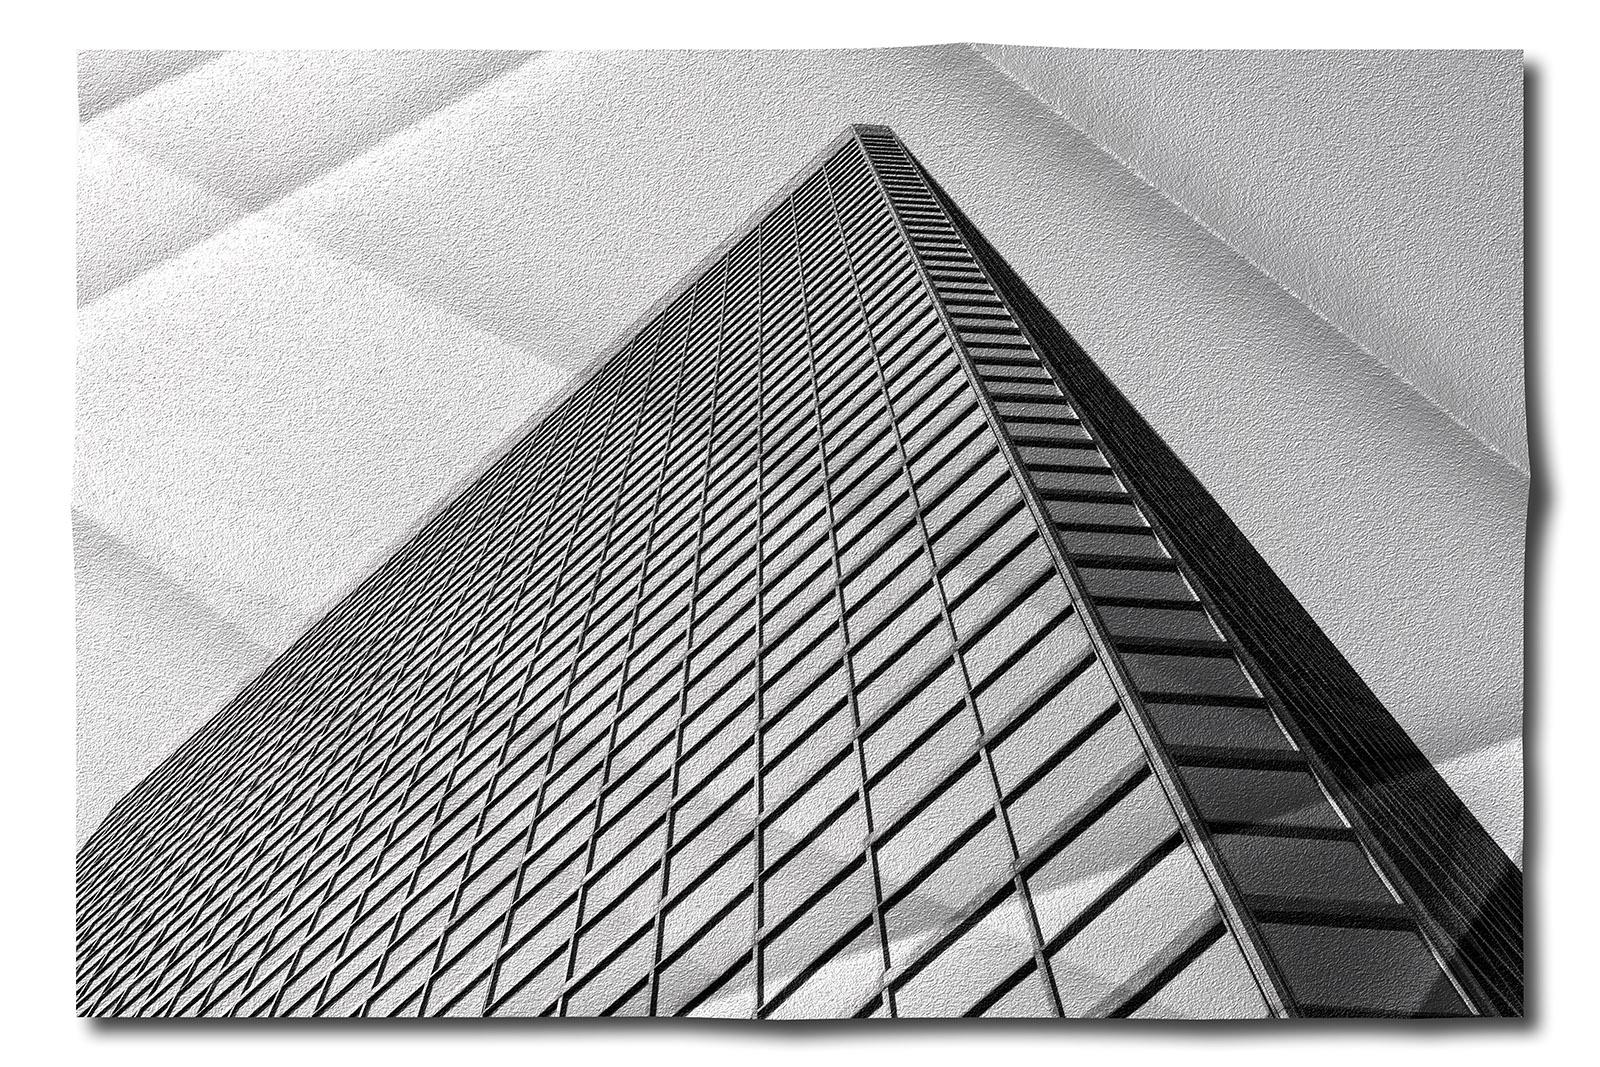 Architectonic 5 - Limited edition pigment print  -   Limited Editions of 5
Signed + numbered by artist, with certificate of authenticity 

This is an Archival Pigment print on fiber based paper ( Hahnemühle Photo RAG Baryta 315 gsm ). The inks used